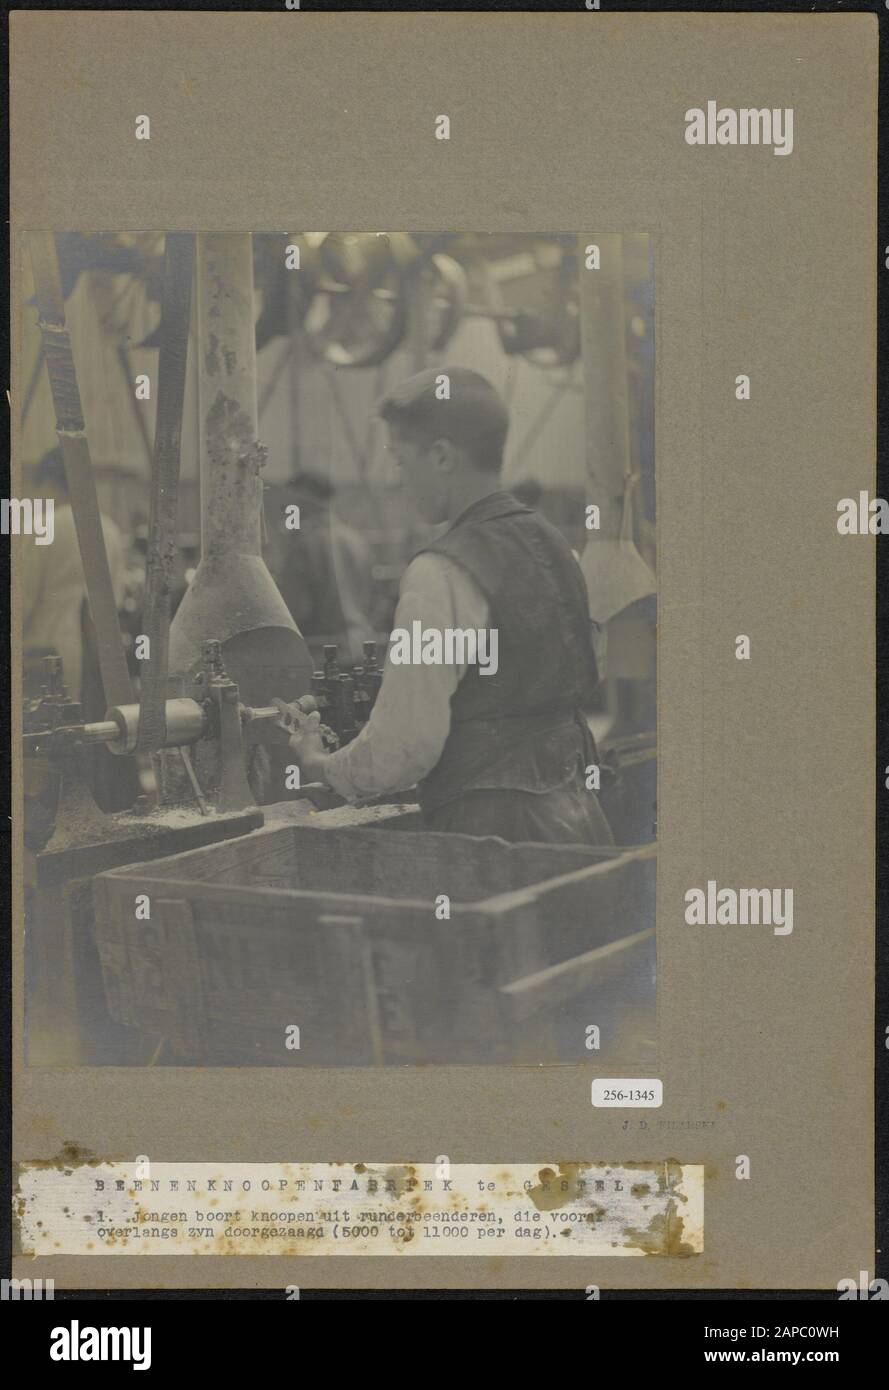 Legs knotting factory in Gestel Description: 1. boy drills knots out of bovine bones, which have been cut through beforehand (5000-11000 per day) Date: 1919 Location: Gestel, Noord-Brabant Keywords: workers, leg, drills, factories, children, knots Stock Photo